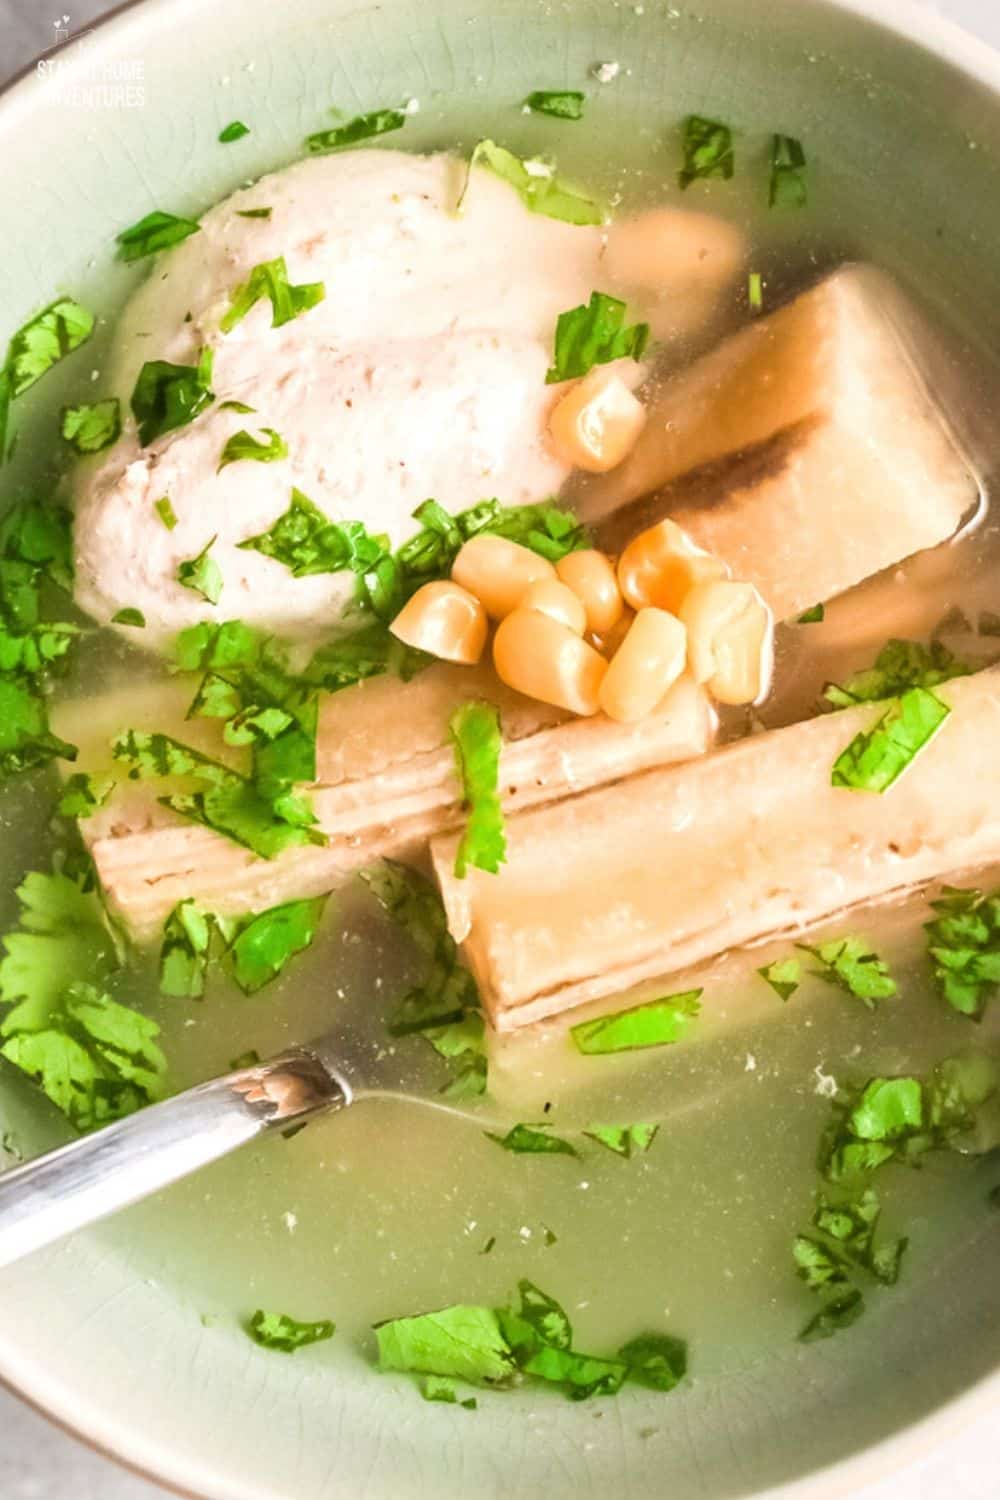 Learn how to make easy sopas de pollo y platanos (plantain and chicken soup) and learn why this dish is so loved by many. via @mystayathome